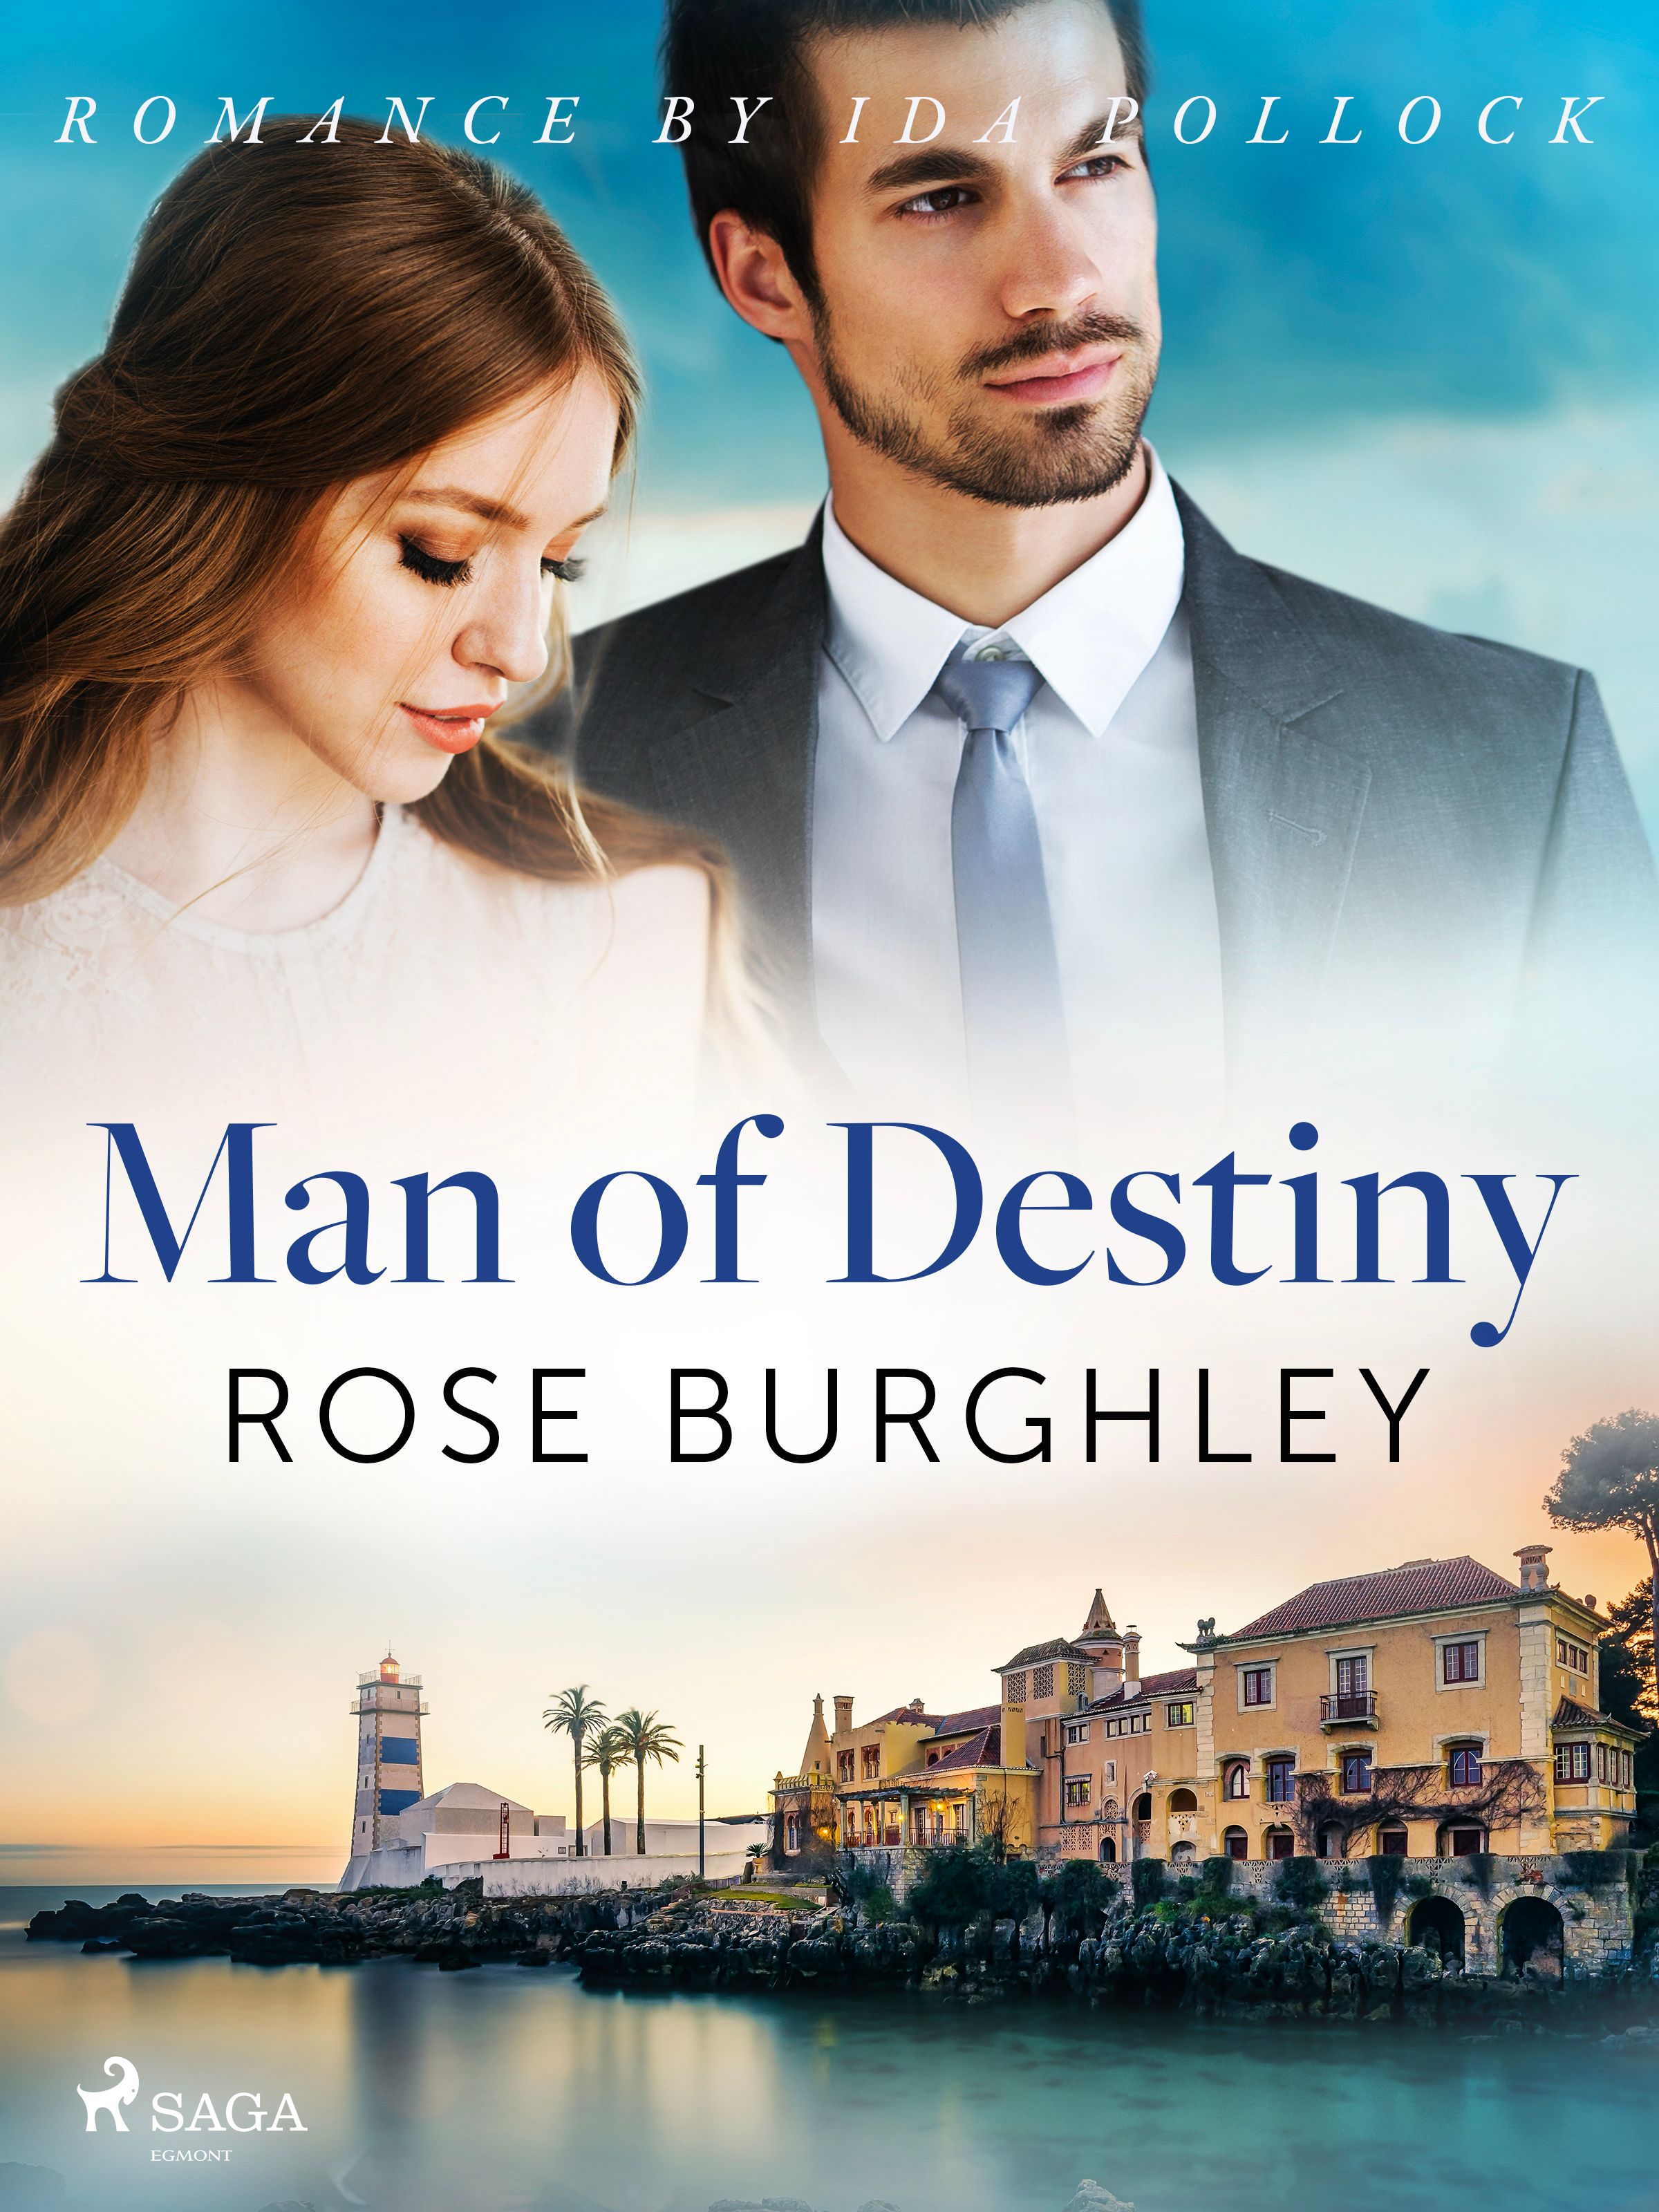 Man of Destiny, eBook by Rose Burghley